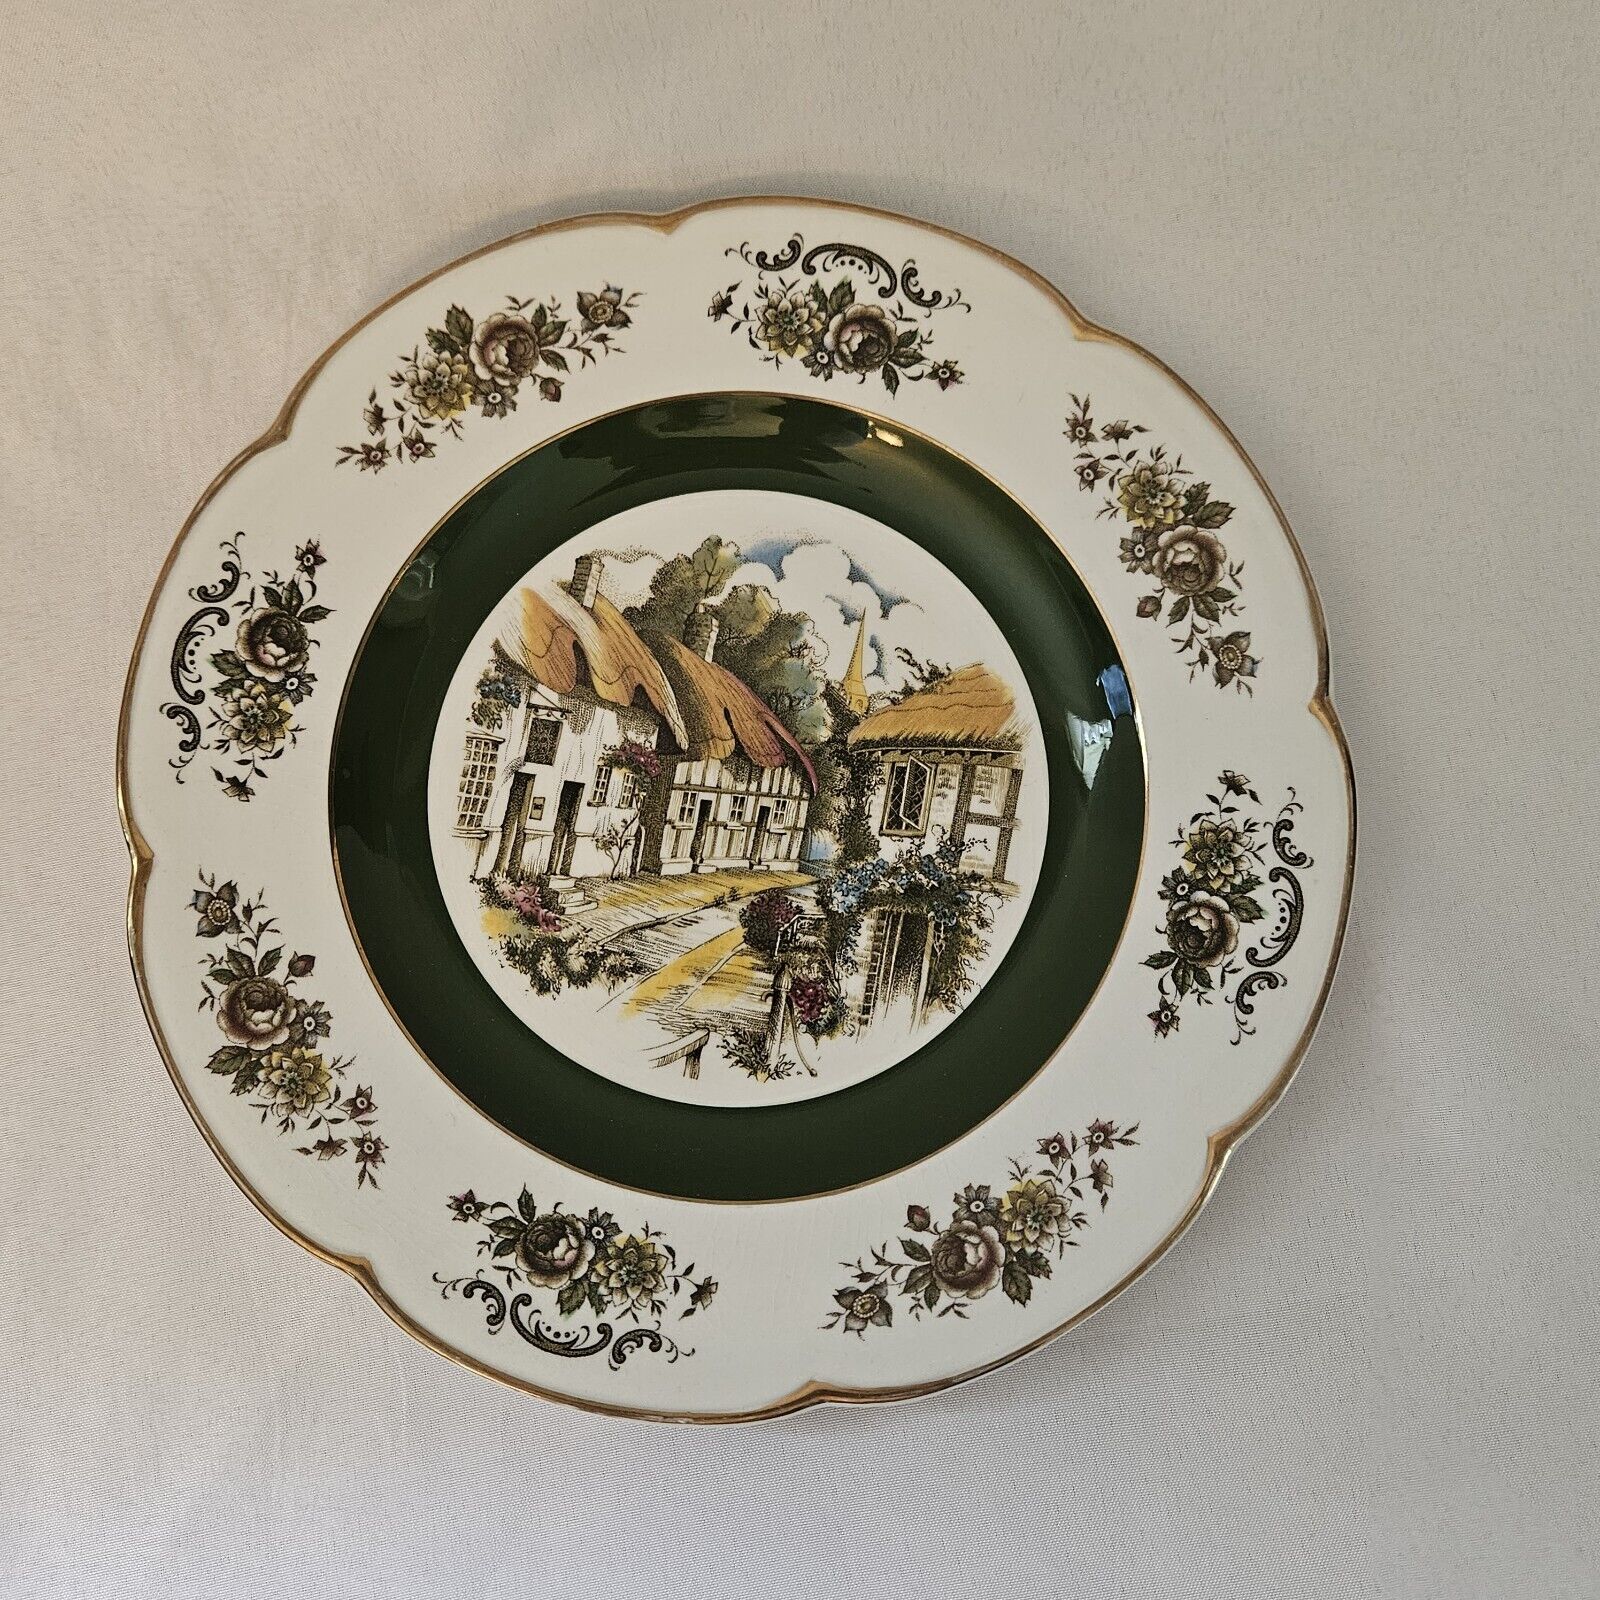 Ascot Service Plate By Wood and Sons England Alpine White Ironstone Decorative